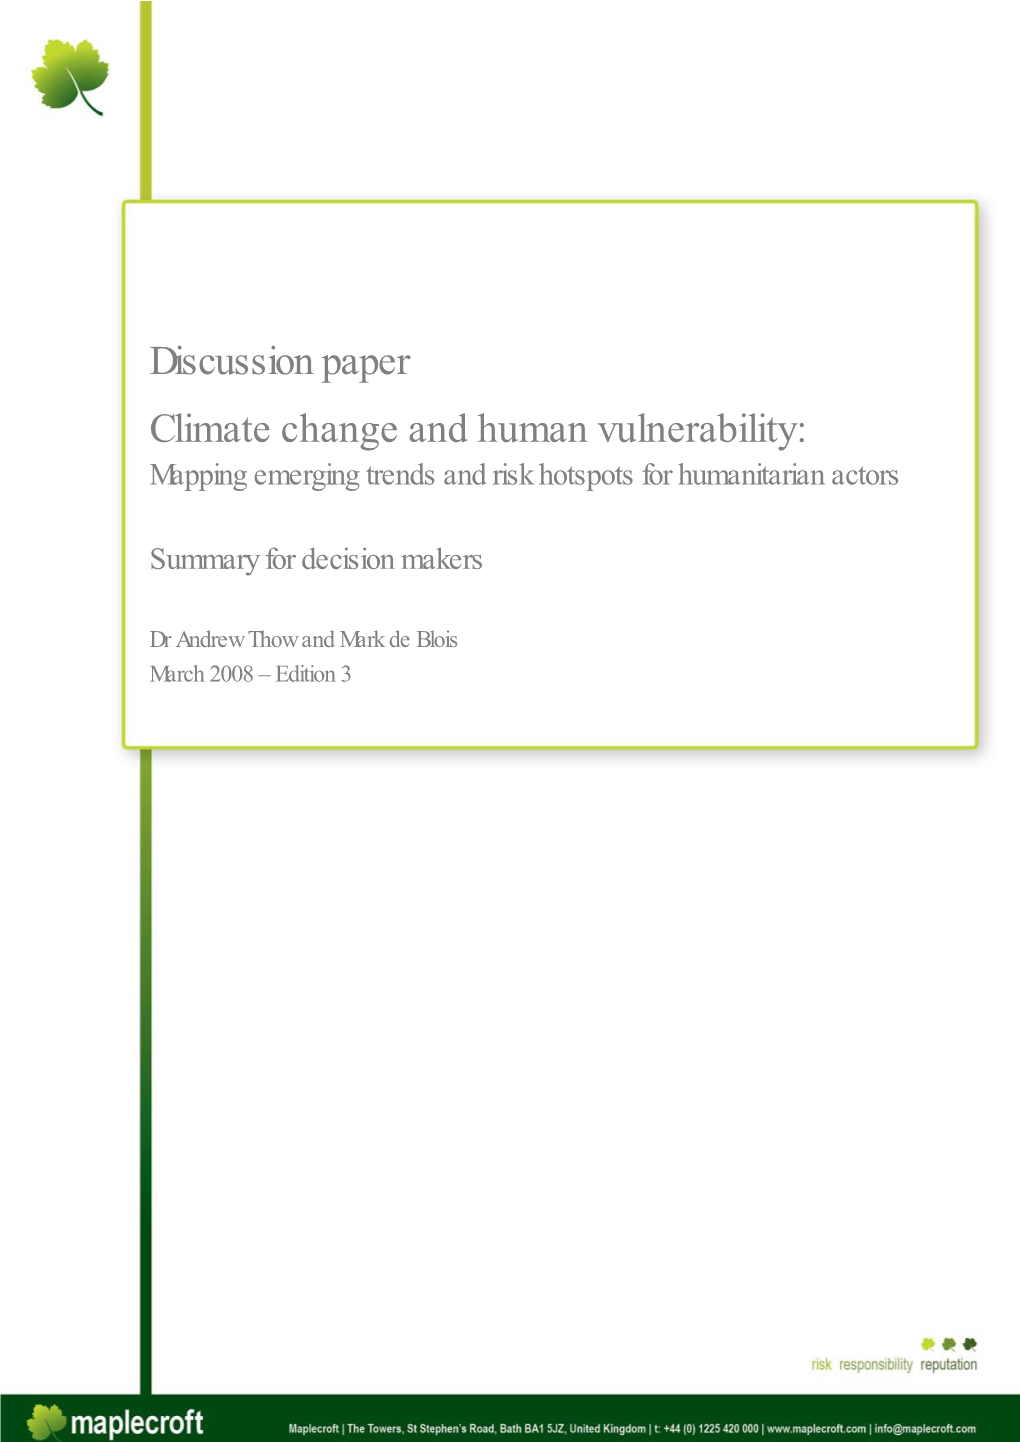 Discussion Paper Climate Change and Human Vulnerability: Mapping Emerging Trends and Risk Hotspots for Humanitarian Actors